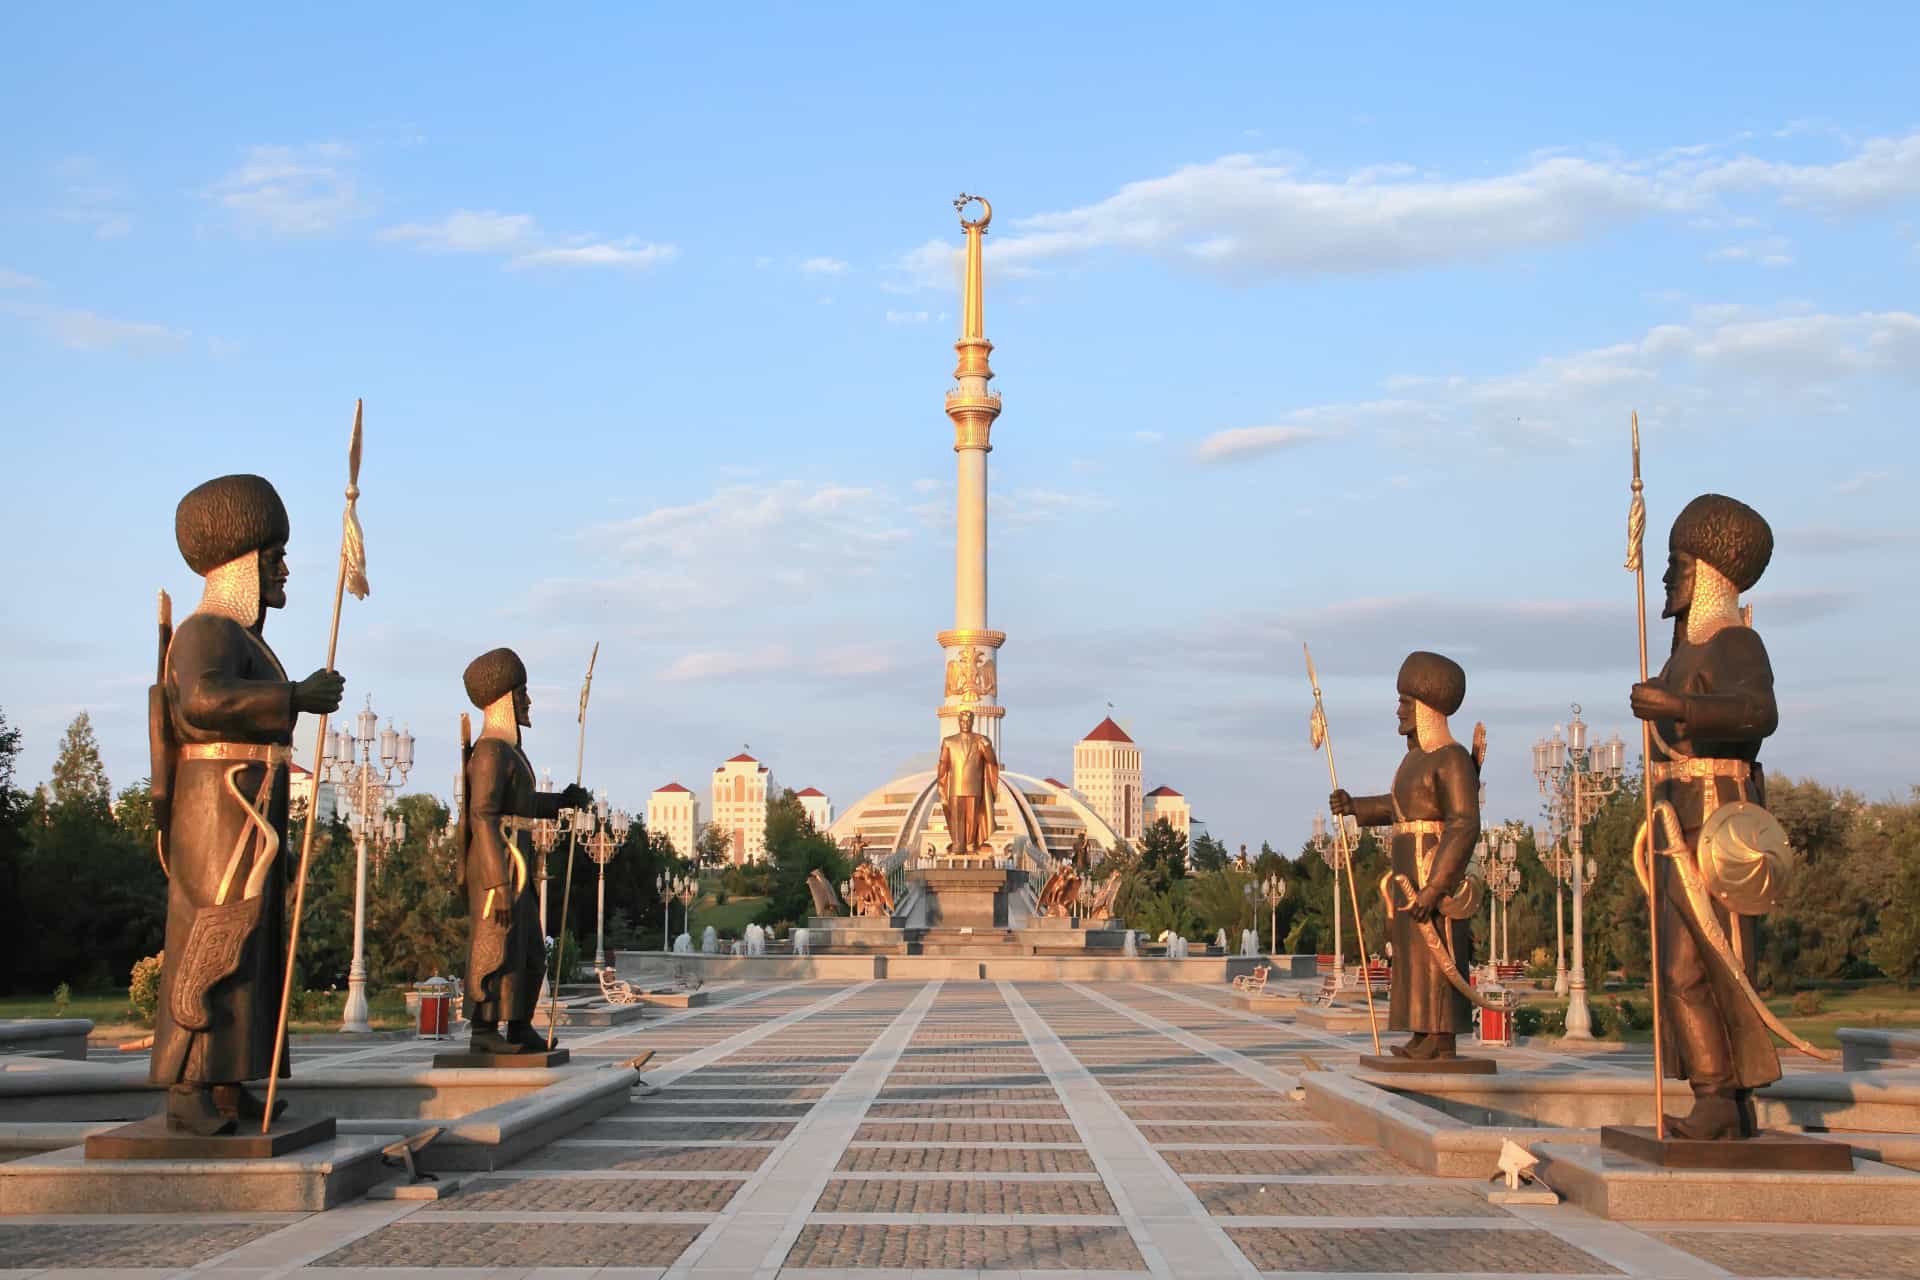 Central Asia is relatively unexplored by westerners. And Turkmenistan is by far the least visited of the region's "stans." This is likely due to the decades-long reign of the bizarre dictator, Saparmyrat Niyazov. However the country has been quickly modernizing since his death in 2006.